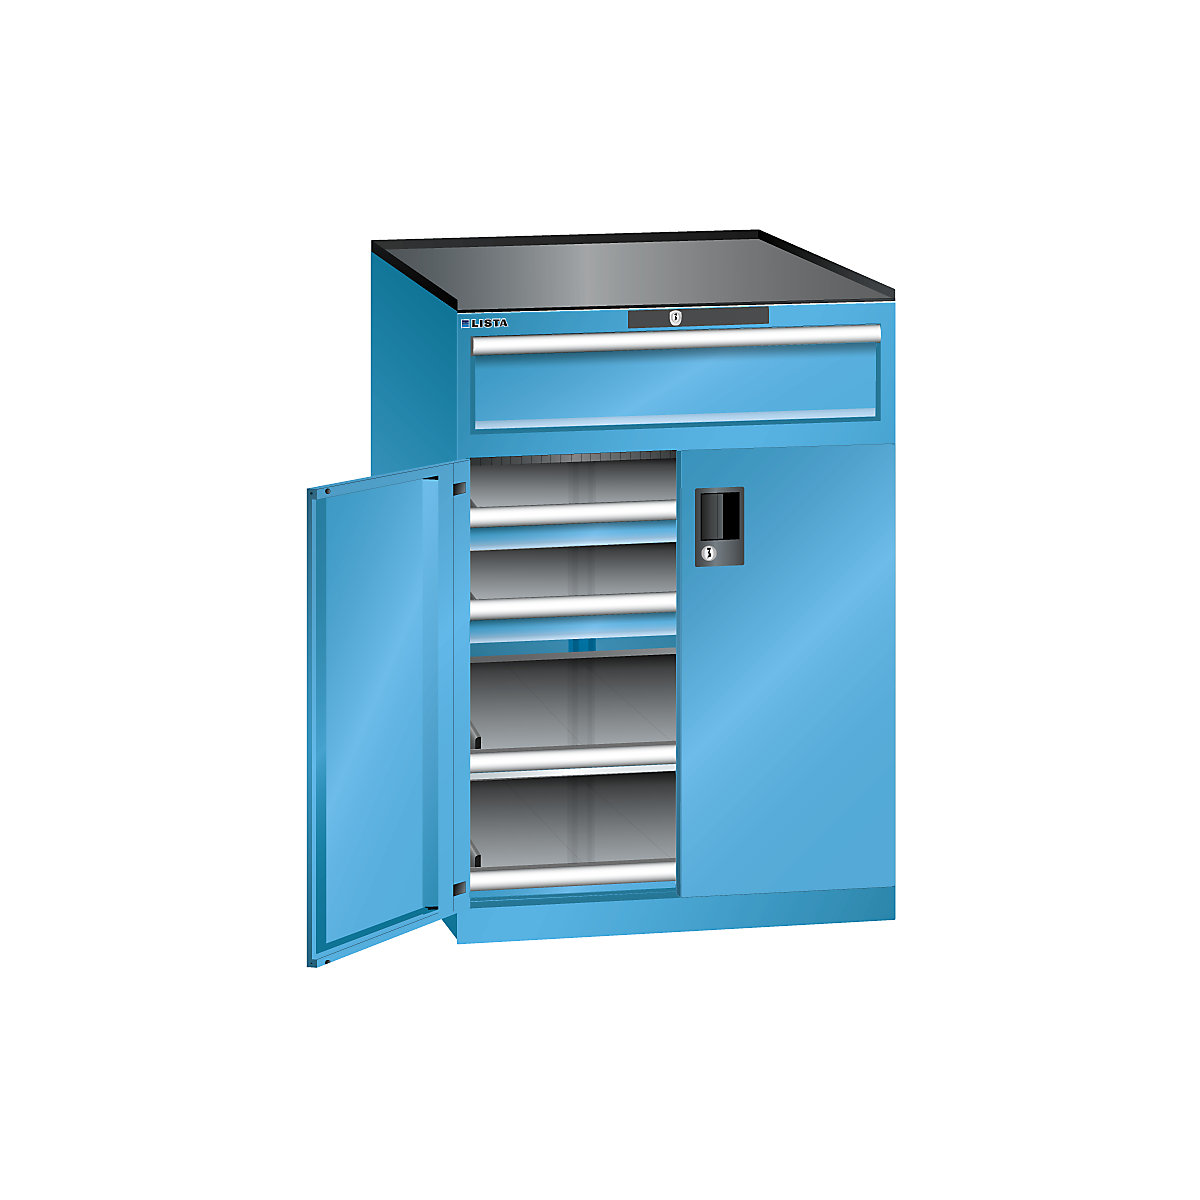 Drawer cupboard with hinged doors - LISTA